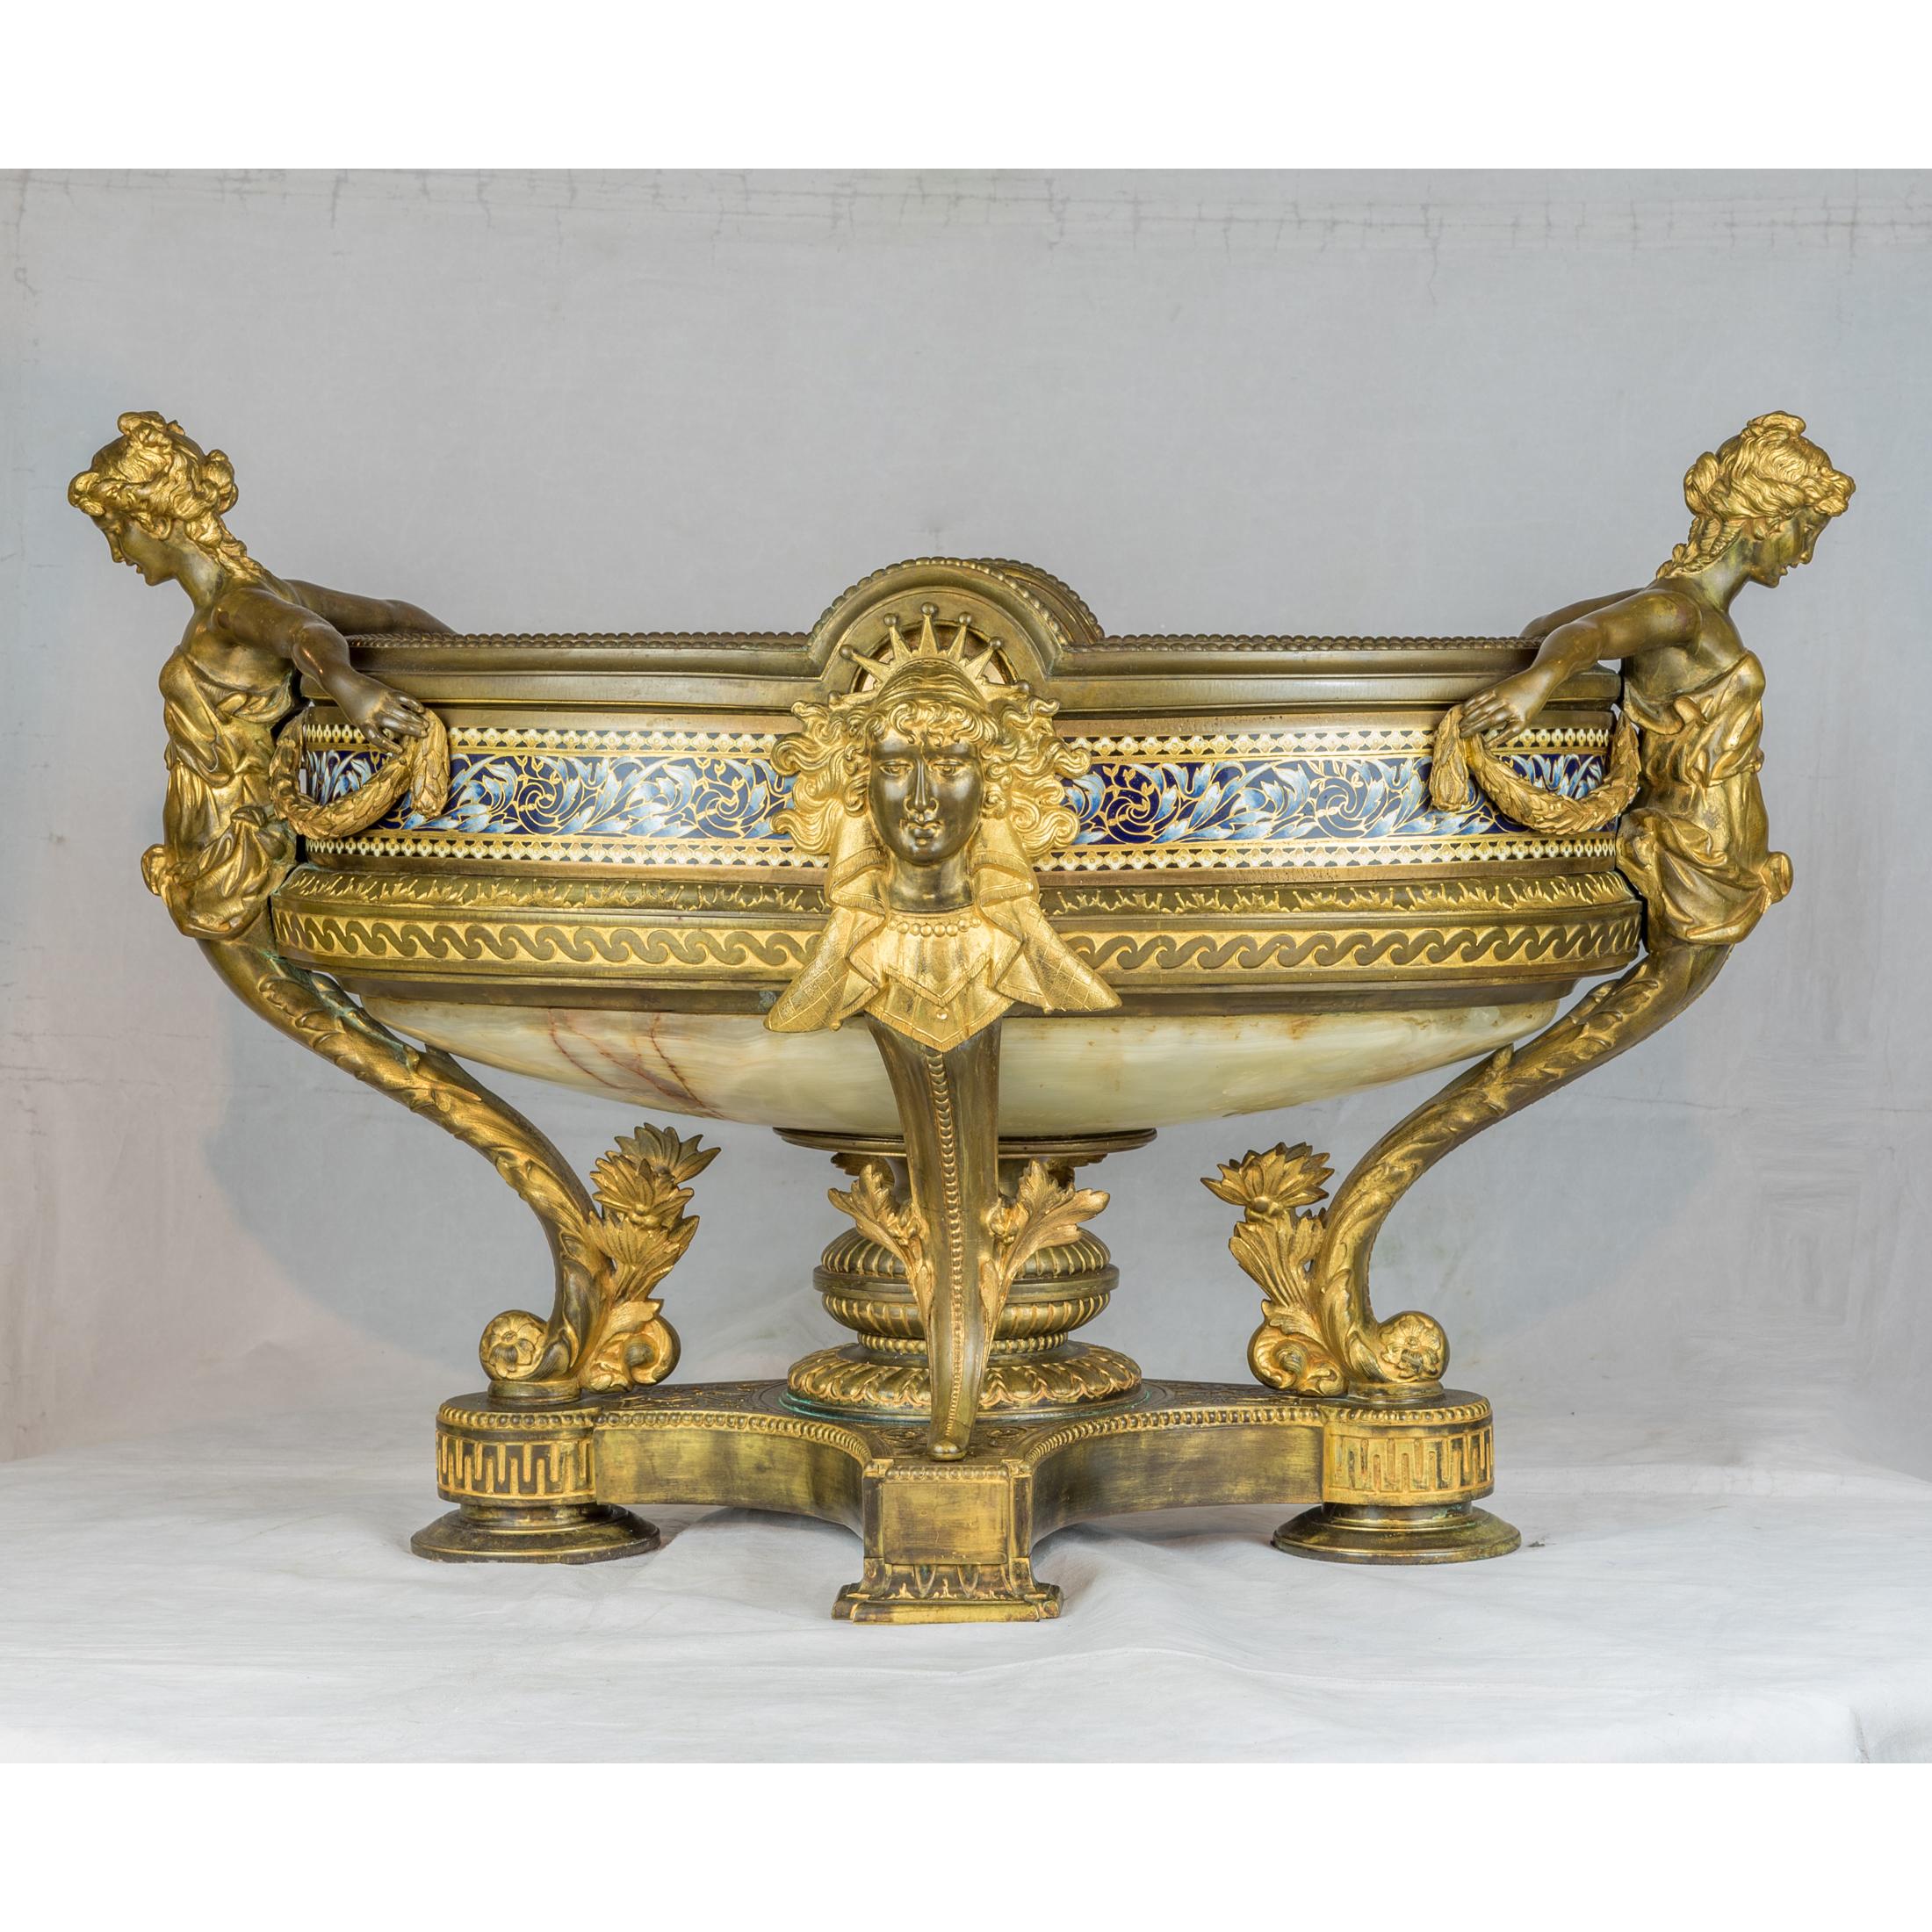 A very fine quality renaissance revival gilt-bronze and champlevé planter, with oval bowl and caryatid handles, a regal mask head to either side and with central enameled band, flanked by a pair of Gilt-Bronze onyx and Cloisonné Enamel Covered Urns